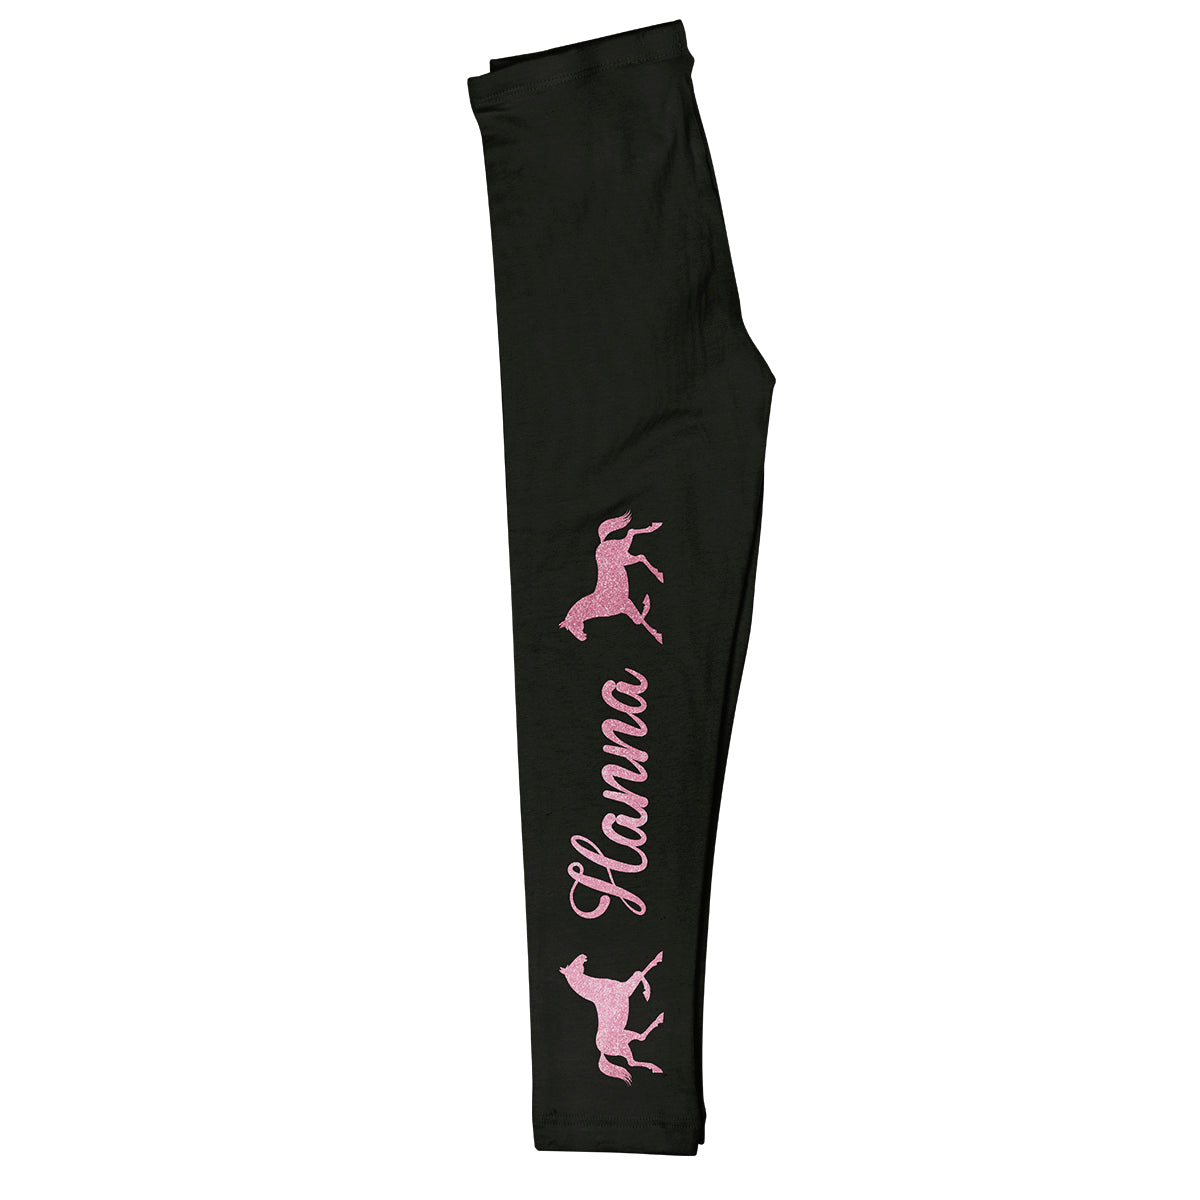 Black and pink girls black leggings with name - Wimziy&Co.